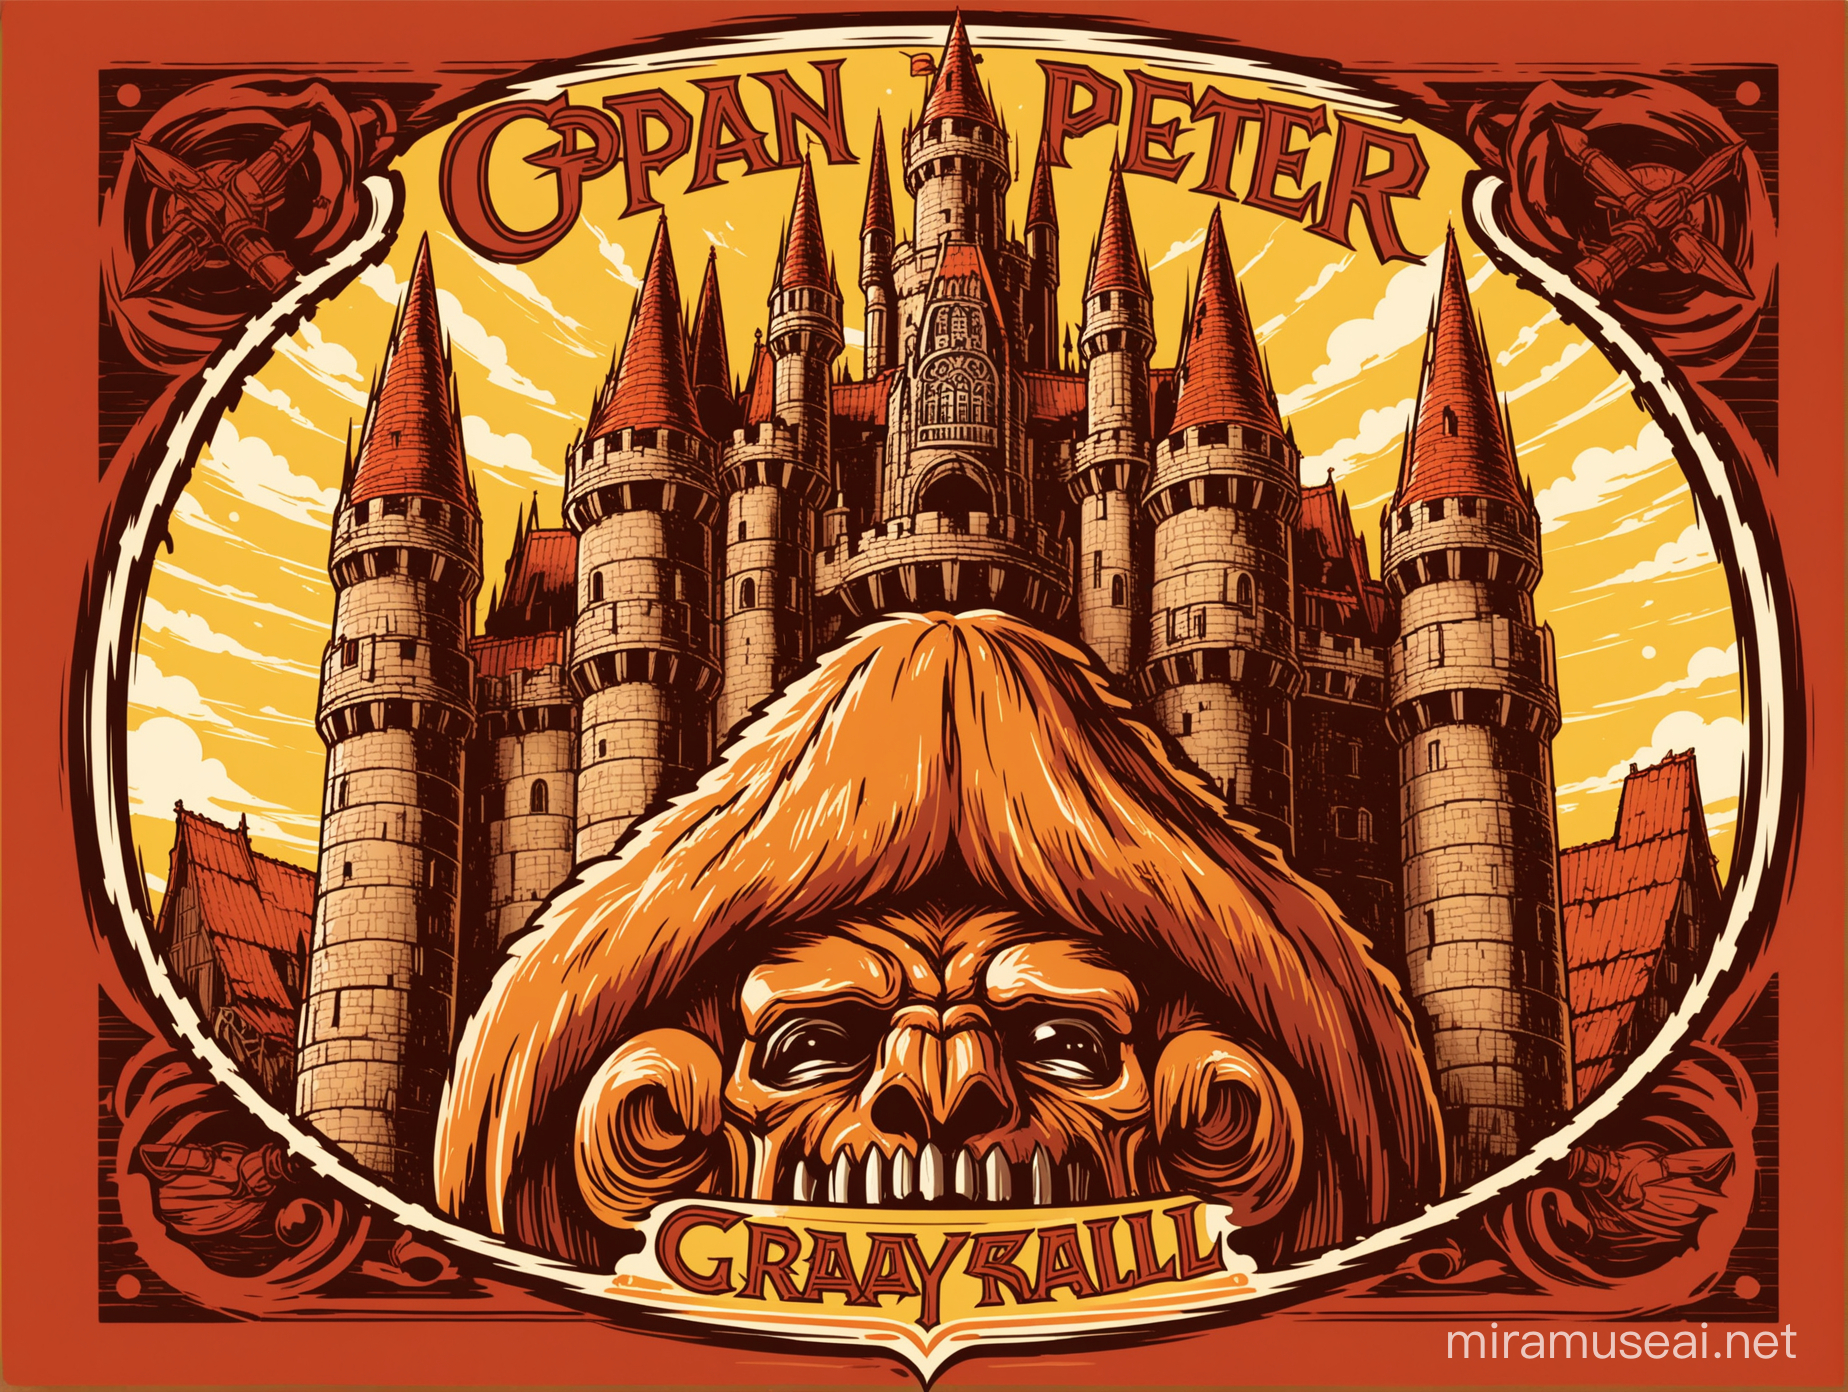 Create a drawing so I can use as a label for our limited-edition craft beer. Use a He-Man's Grayskull Castle style design, but do not mention any words that might infringe copyright laws. The beer style is an Amber Ale from St. Peter's Brewery in Brazil (www.st.peters.com.br. The main brand is Eindhoven. The beer is a rich and flavorful Amber Ale style. Let's capture the essence of adventure and nostalgia with a label that will stand out on the shelves and excite craft beer enthusiasts. Write in Portuguese. Do not create a bottle, I just want an opan label design.